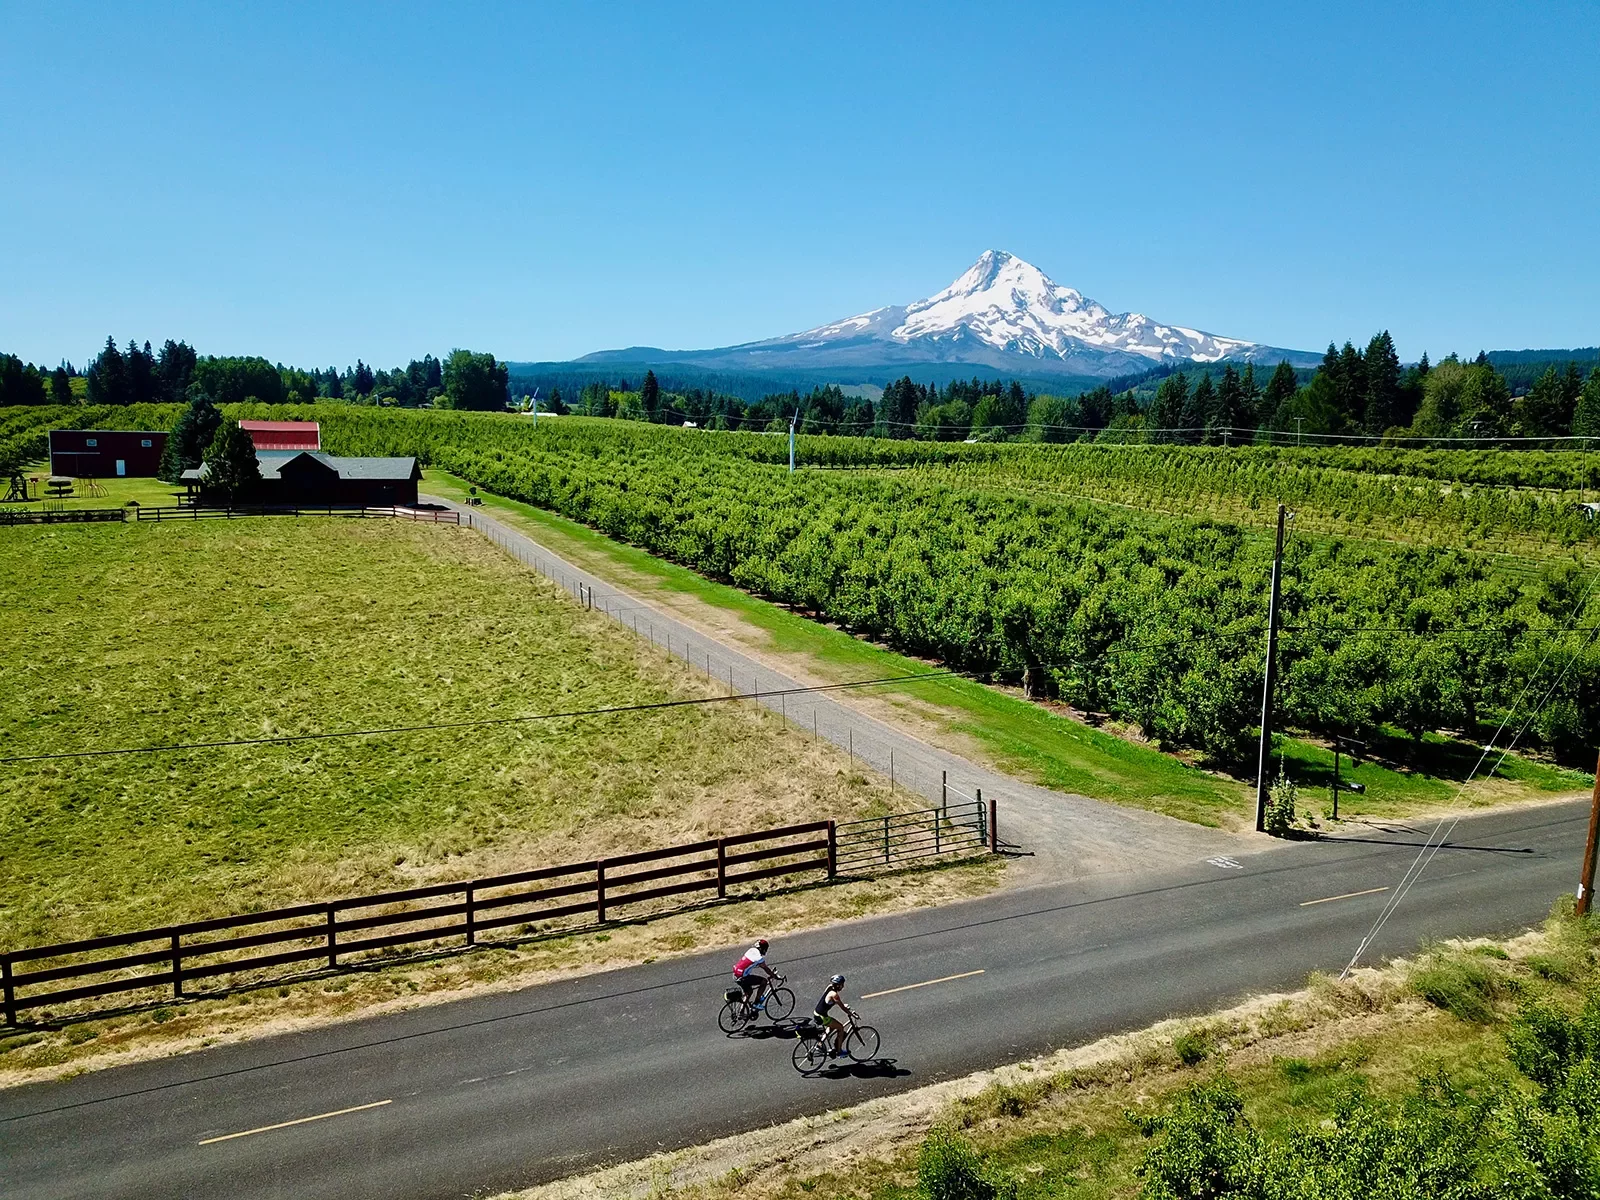 Two guests biking past small farm, Mount Hood in background.